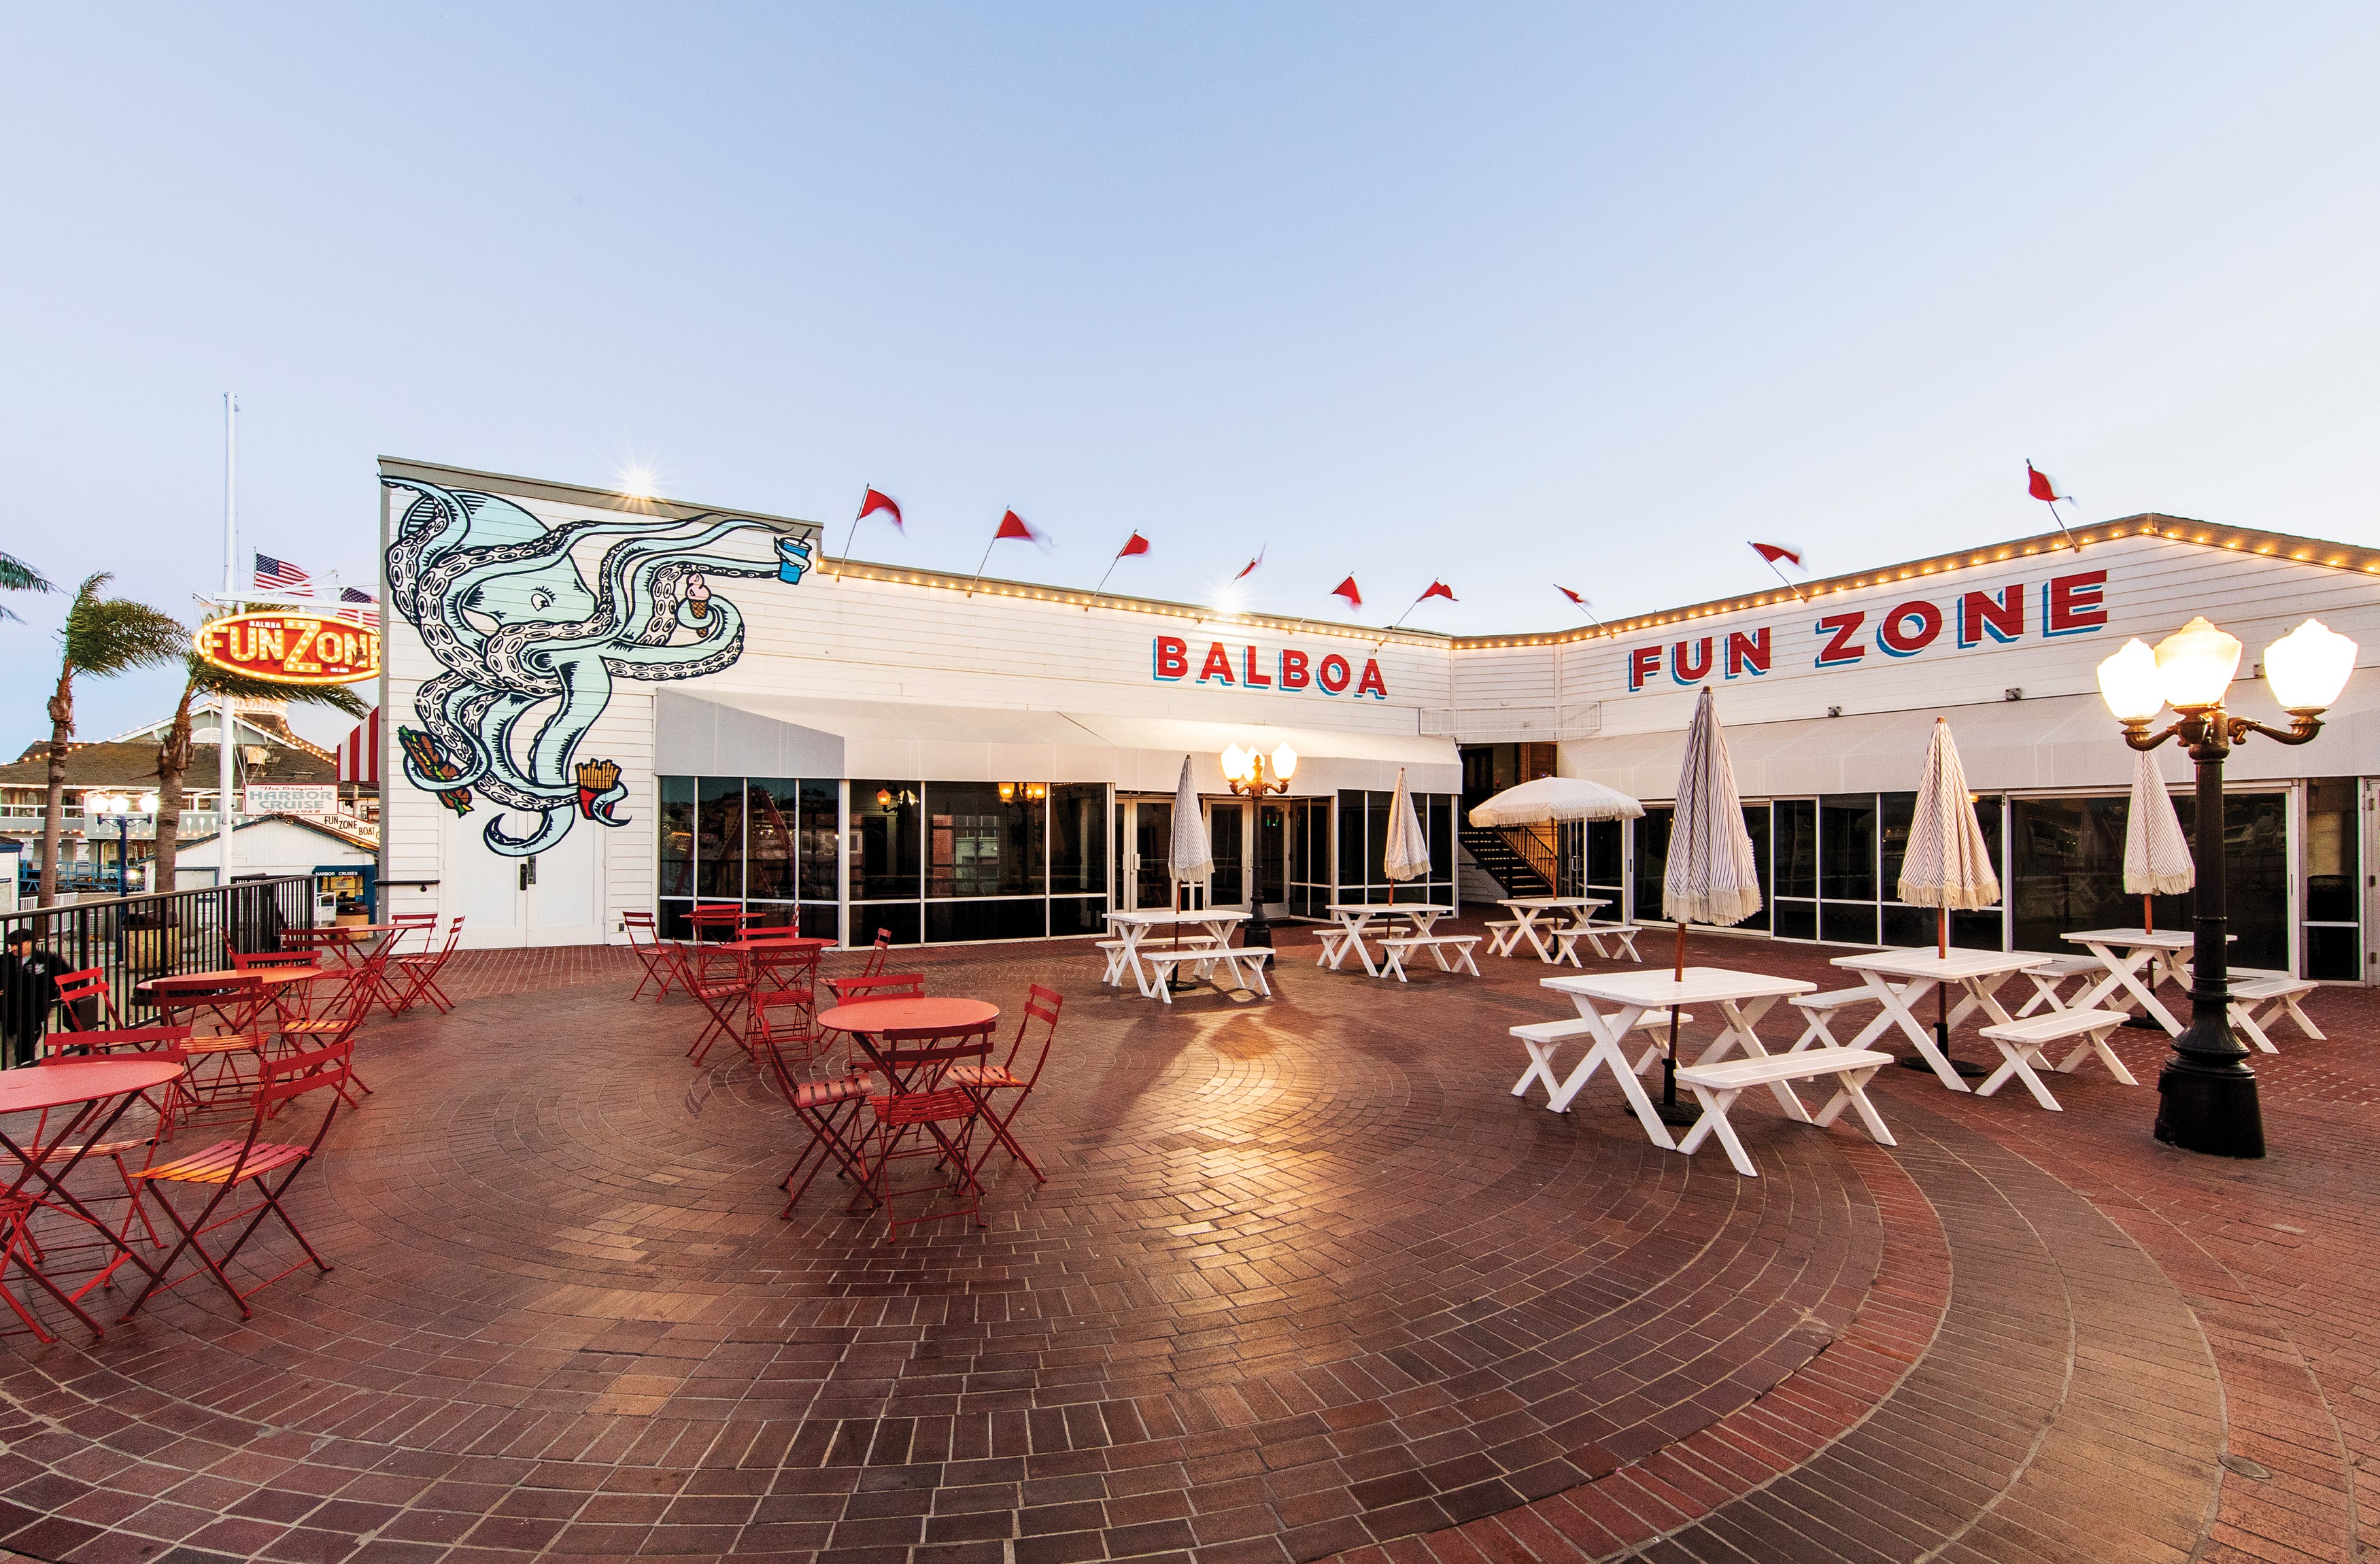 Image of the Balboa Fun Zone in Newport Beach, California with red lettered overhead signage and a playful octopus holding fries, ice cream and a shake. Painted mural of an octopus at the Balboa Fun Zone in Newport Beach, California.